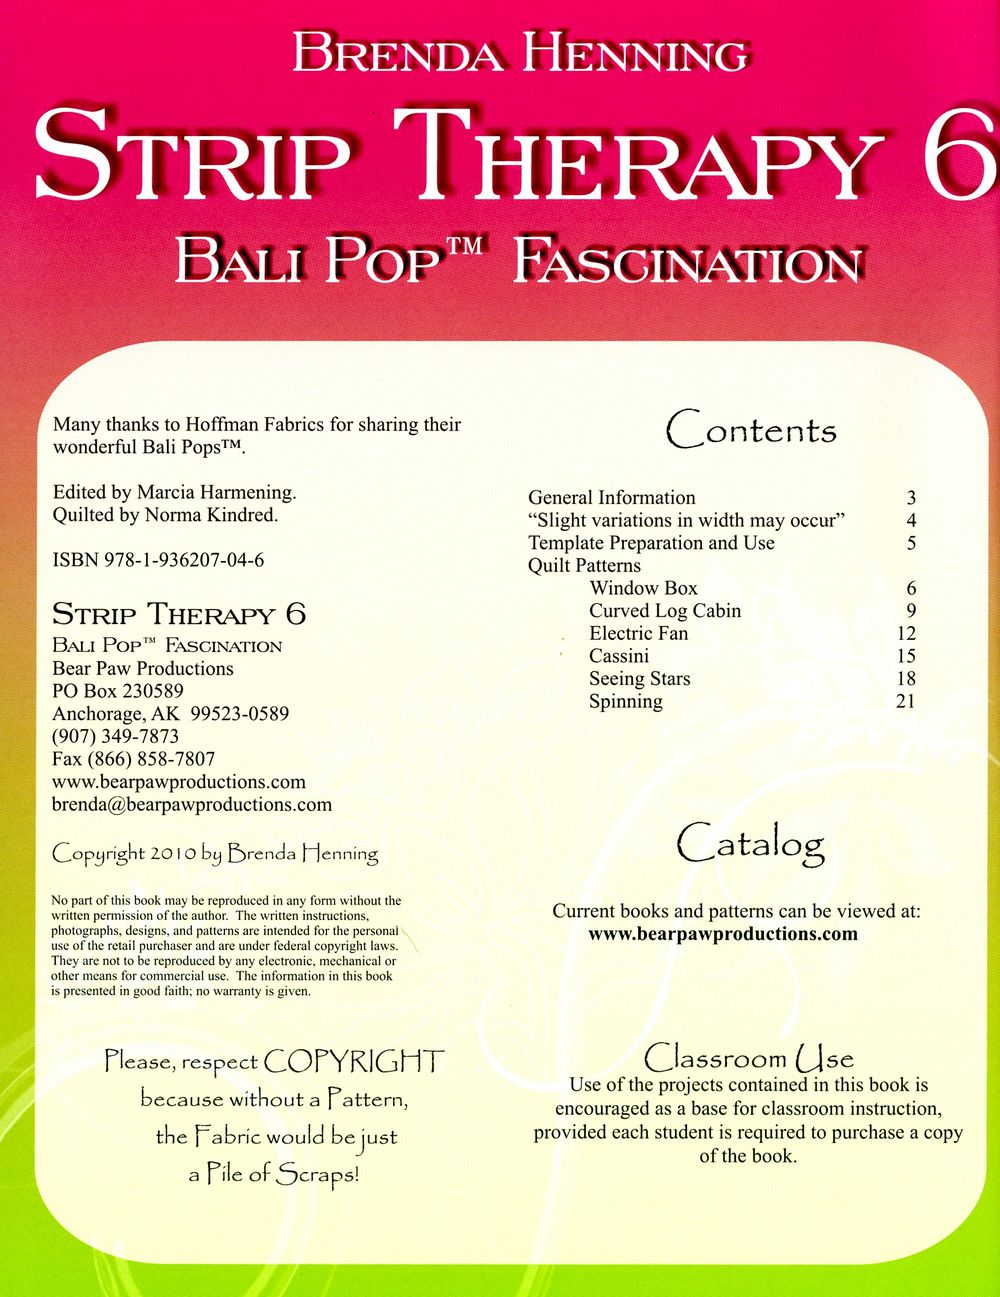 Strip Therapy 6 by Brenda Henning of Bear Paw Productions